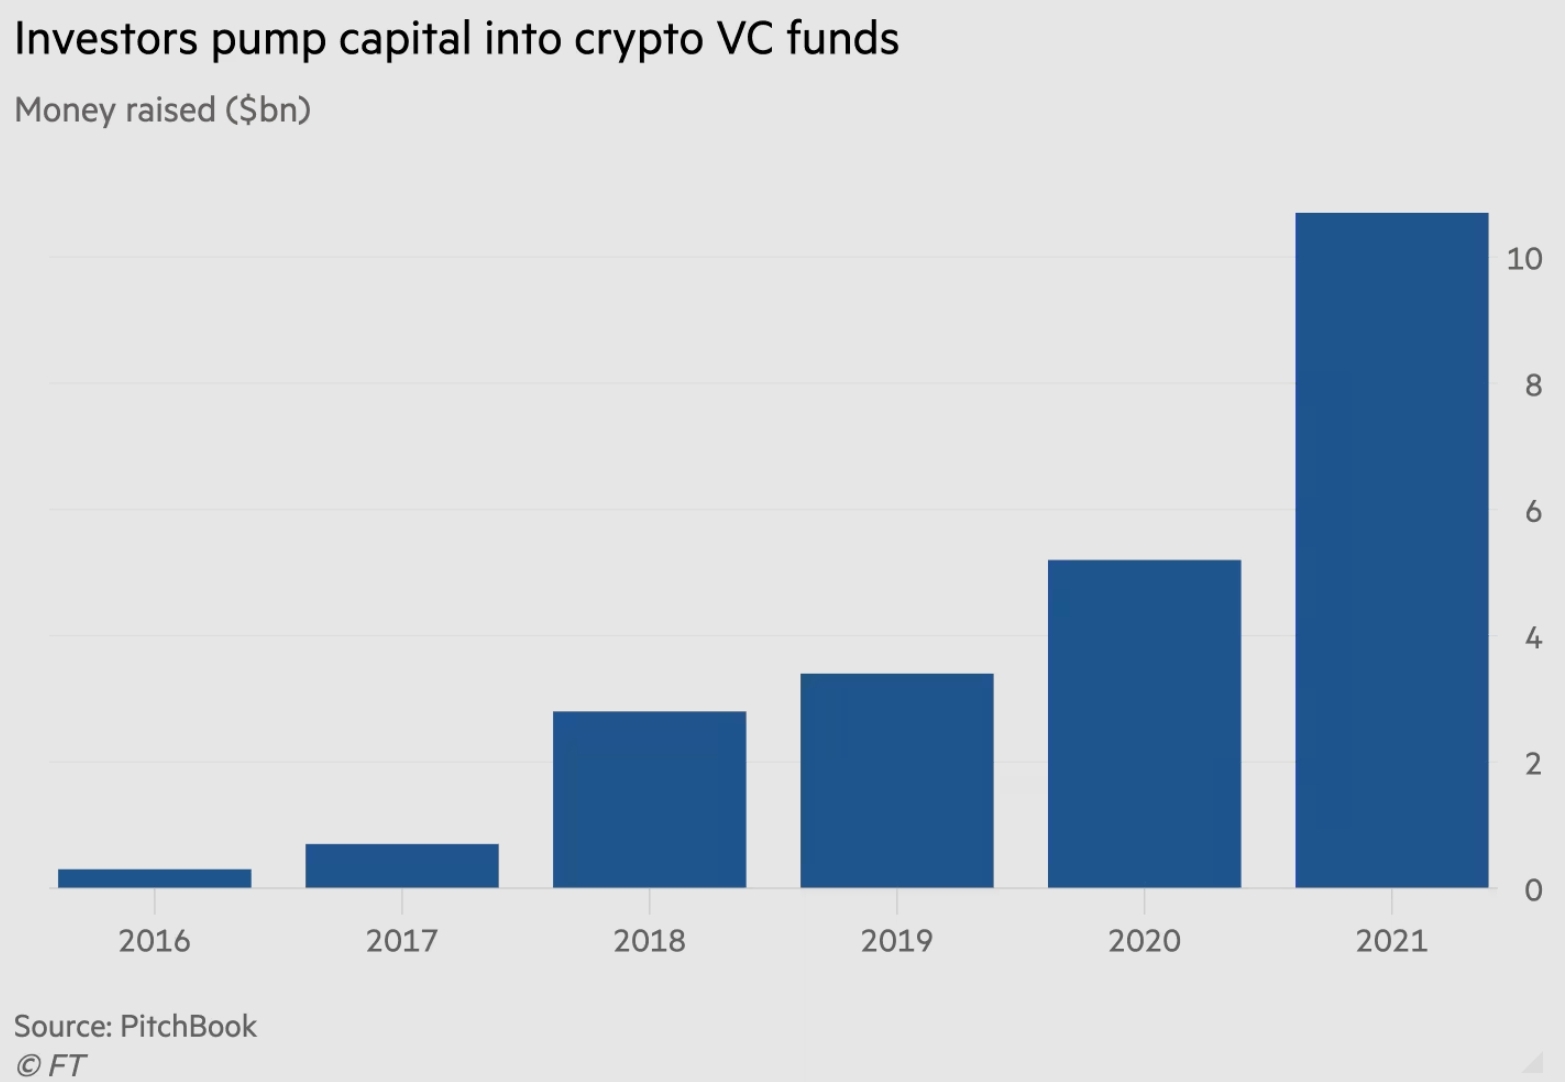 The chart showing investors' capital flowing into VC funds between 2016 and 2021